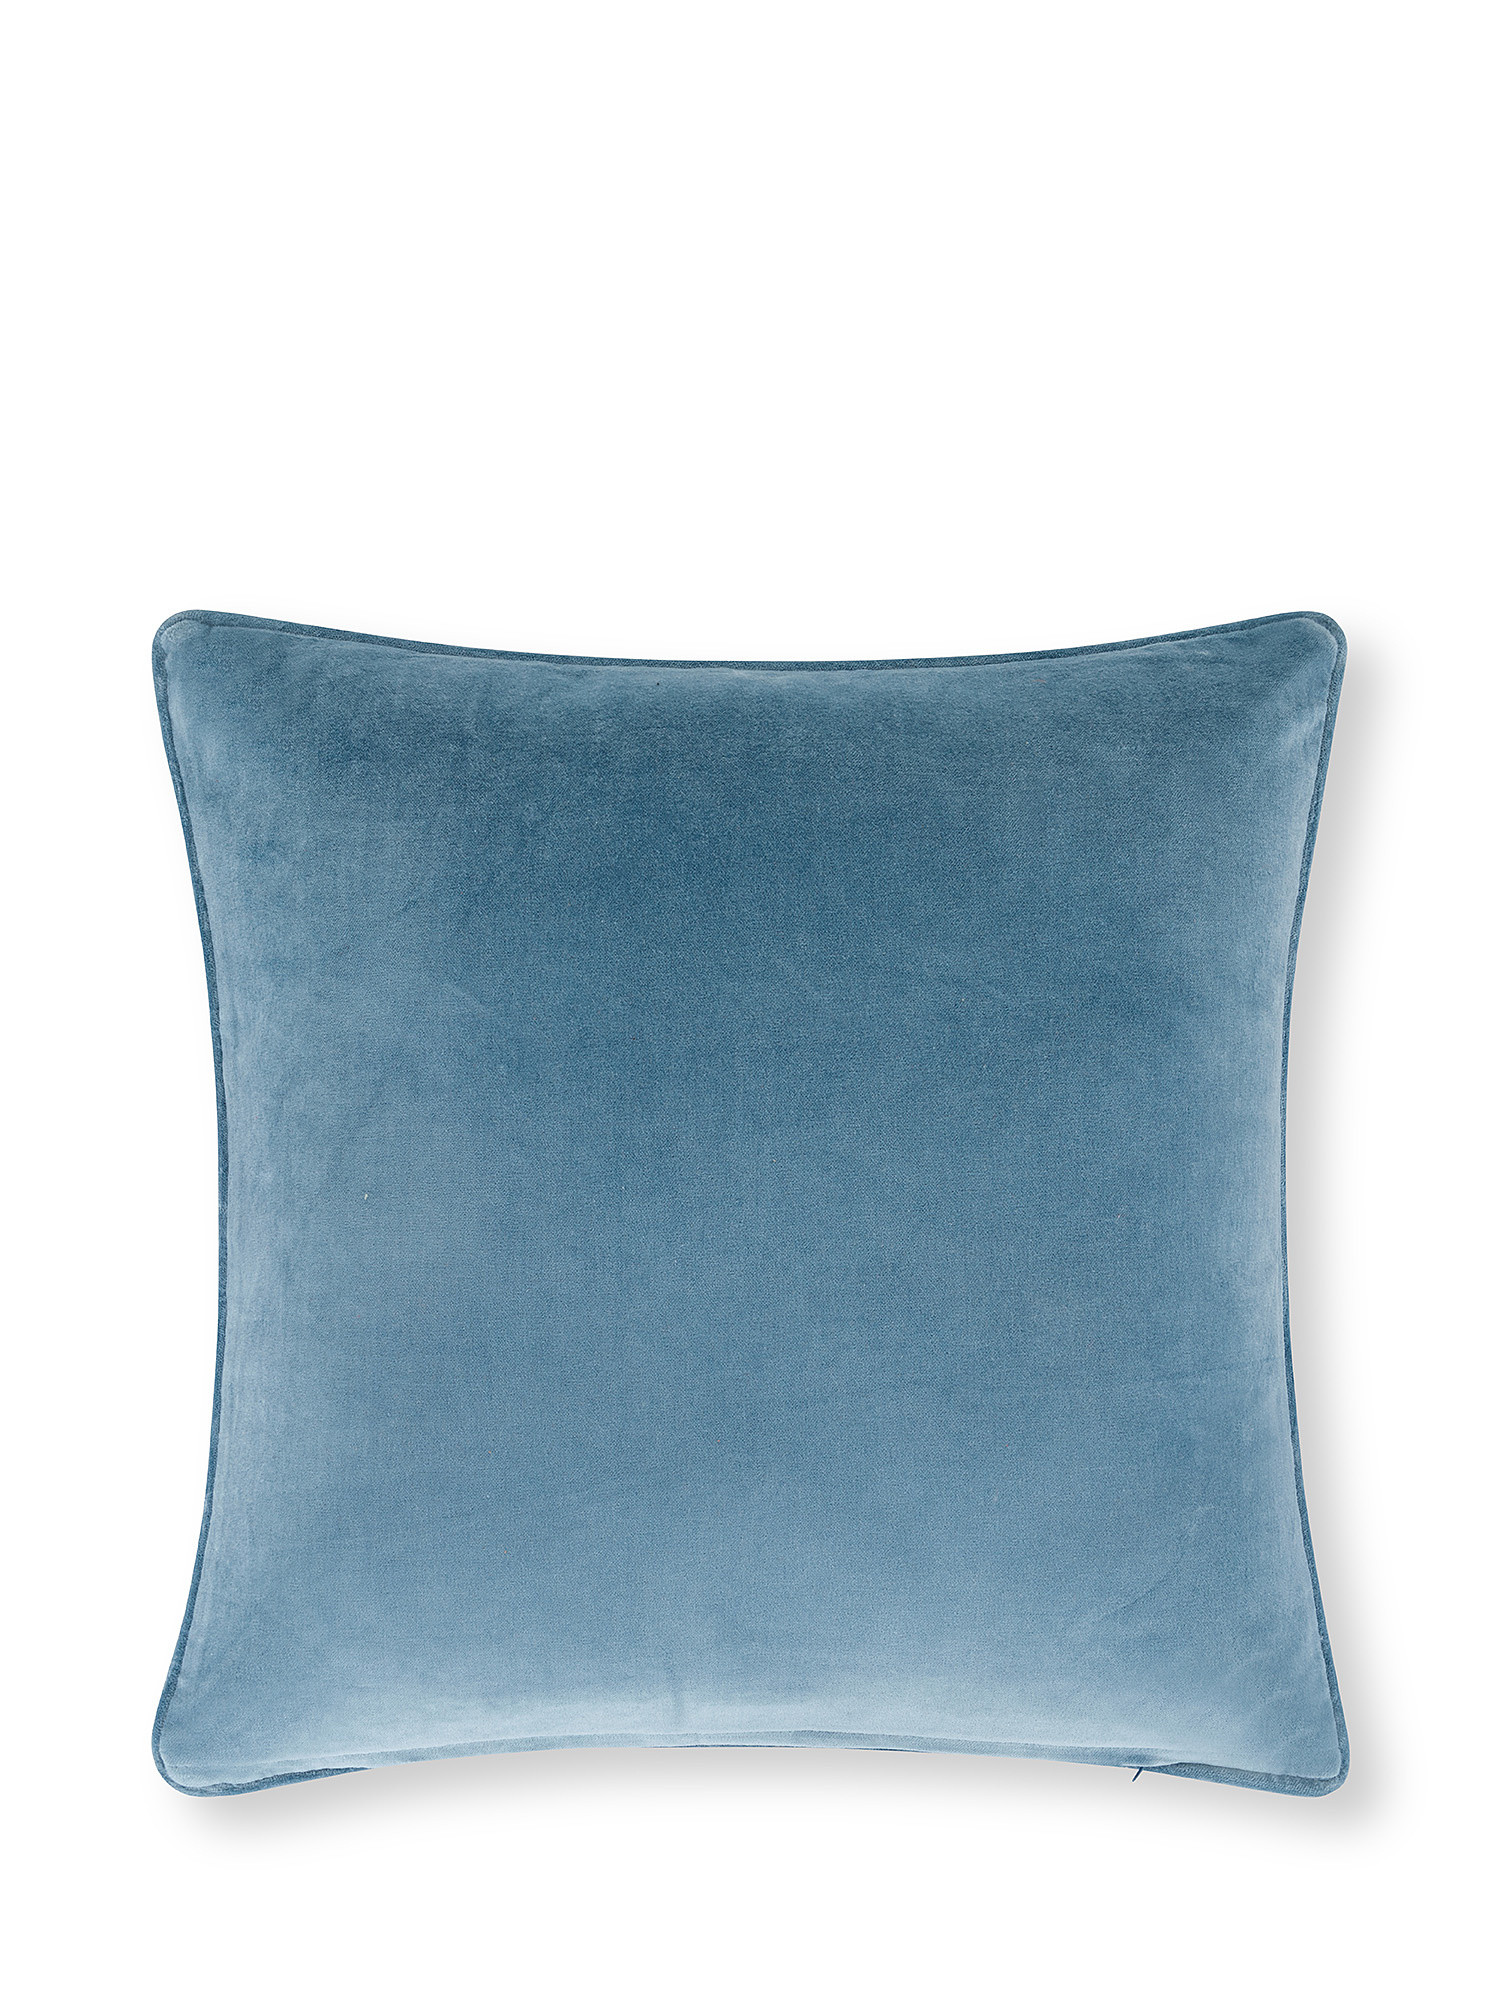 Velvet cushion with flower embroidery 45x45cm, Blue, large image number 1